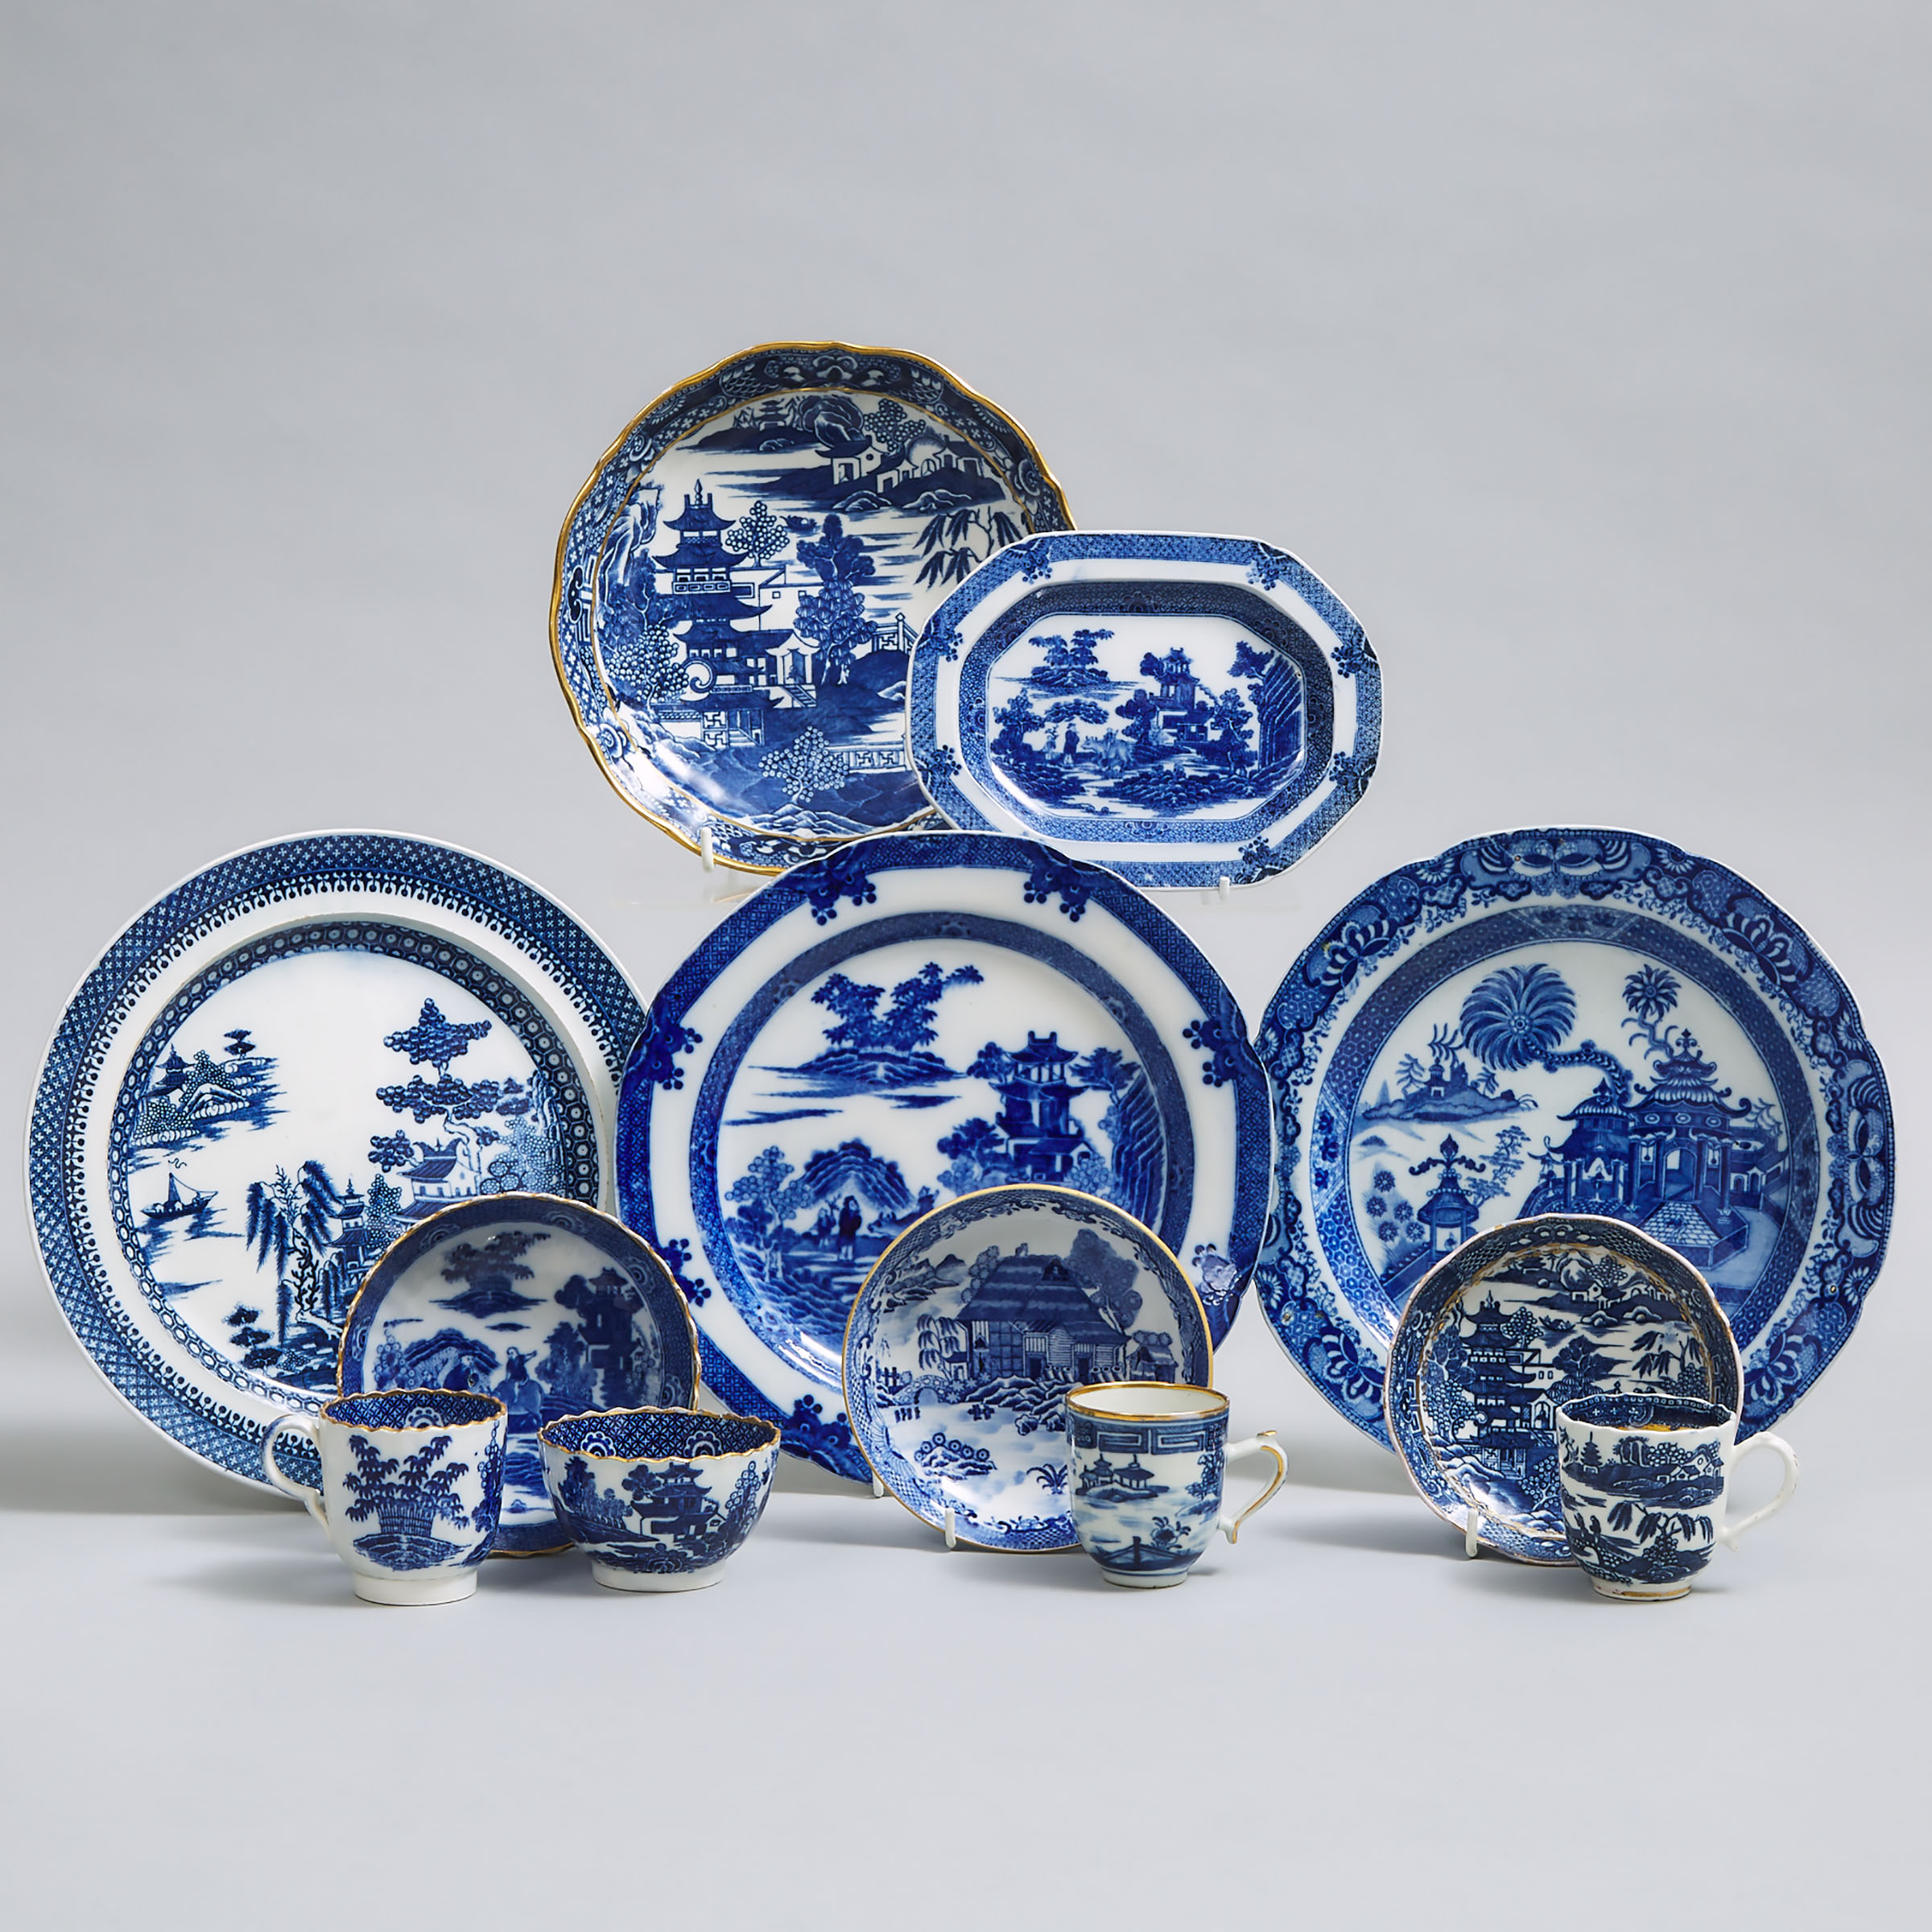 Group of English Blue-Printed Pottery and Porcelain, late 18th/early 19th century